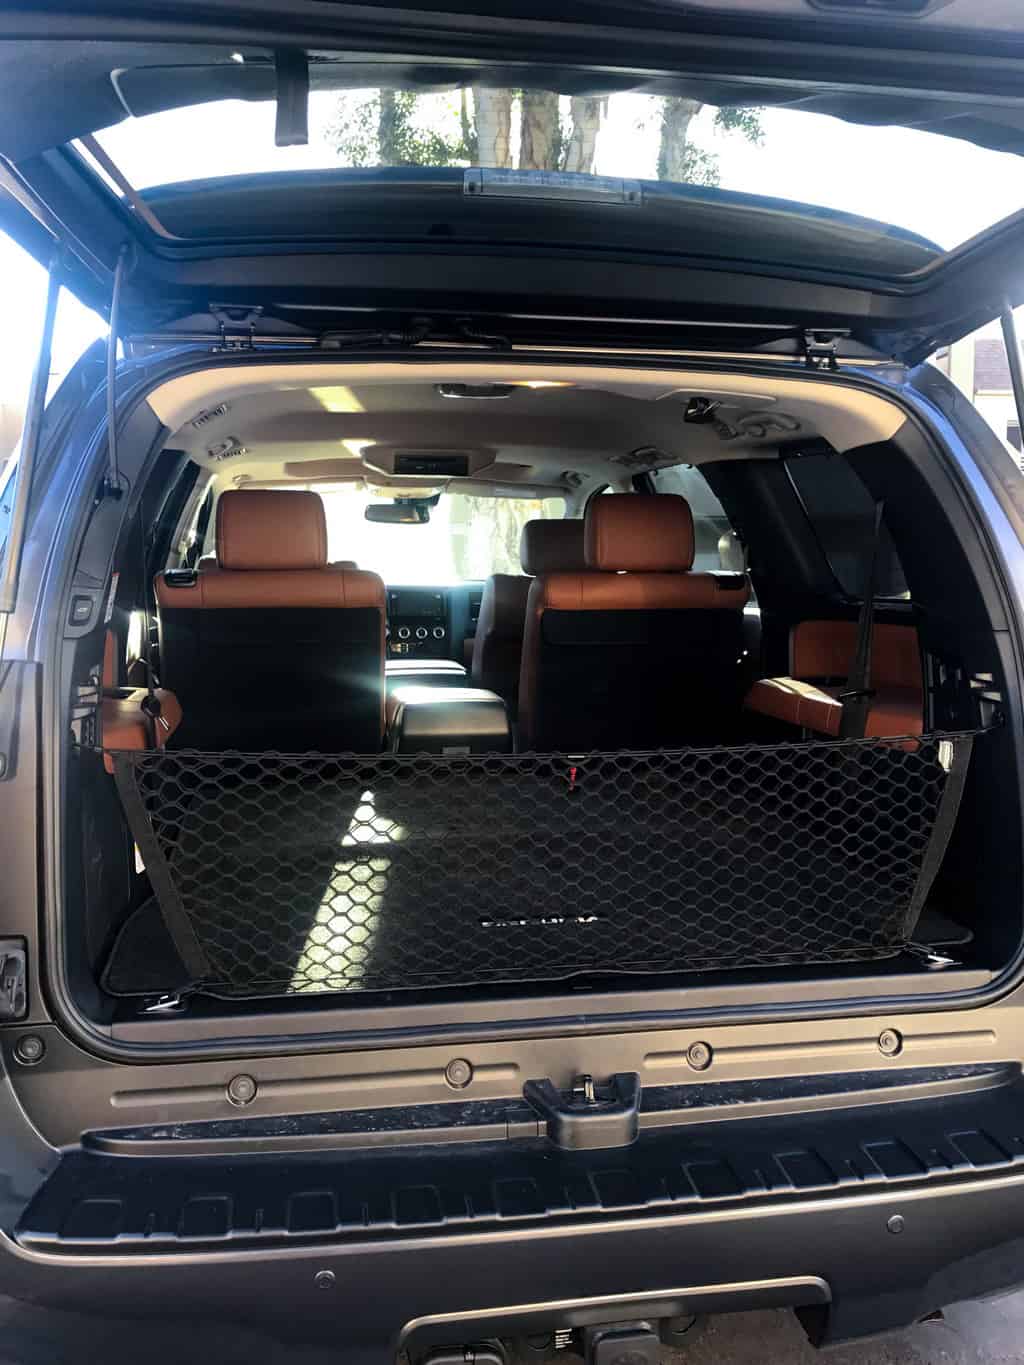 Are you looking to purchase a new SUV? Whether your road trips are quiet and mundane or similar to that of the Griswold’s adventure, from the movie, “National Lampoons Vacation”, there is no better vehicle to do it in comfort and style than in the 2018 Toyota Sequoia, Platinum Edition.